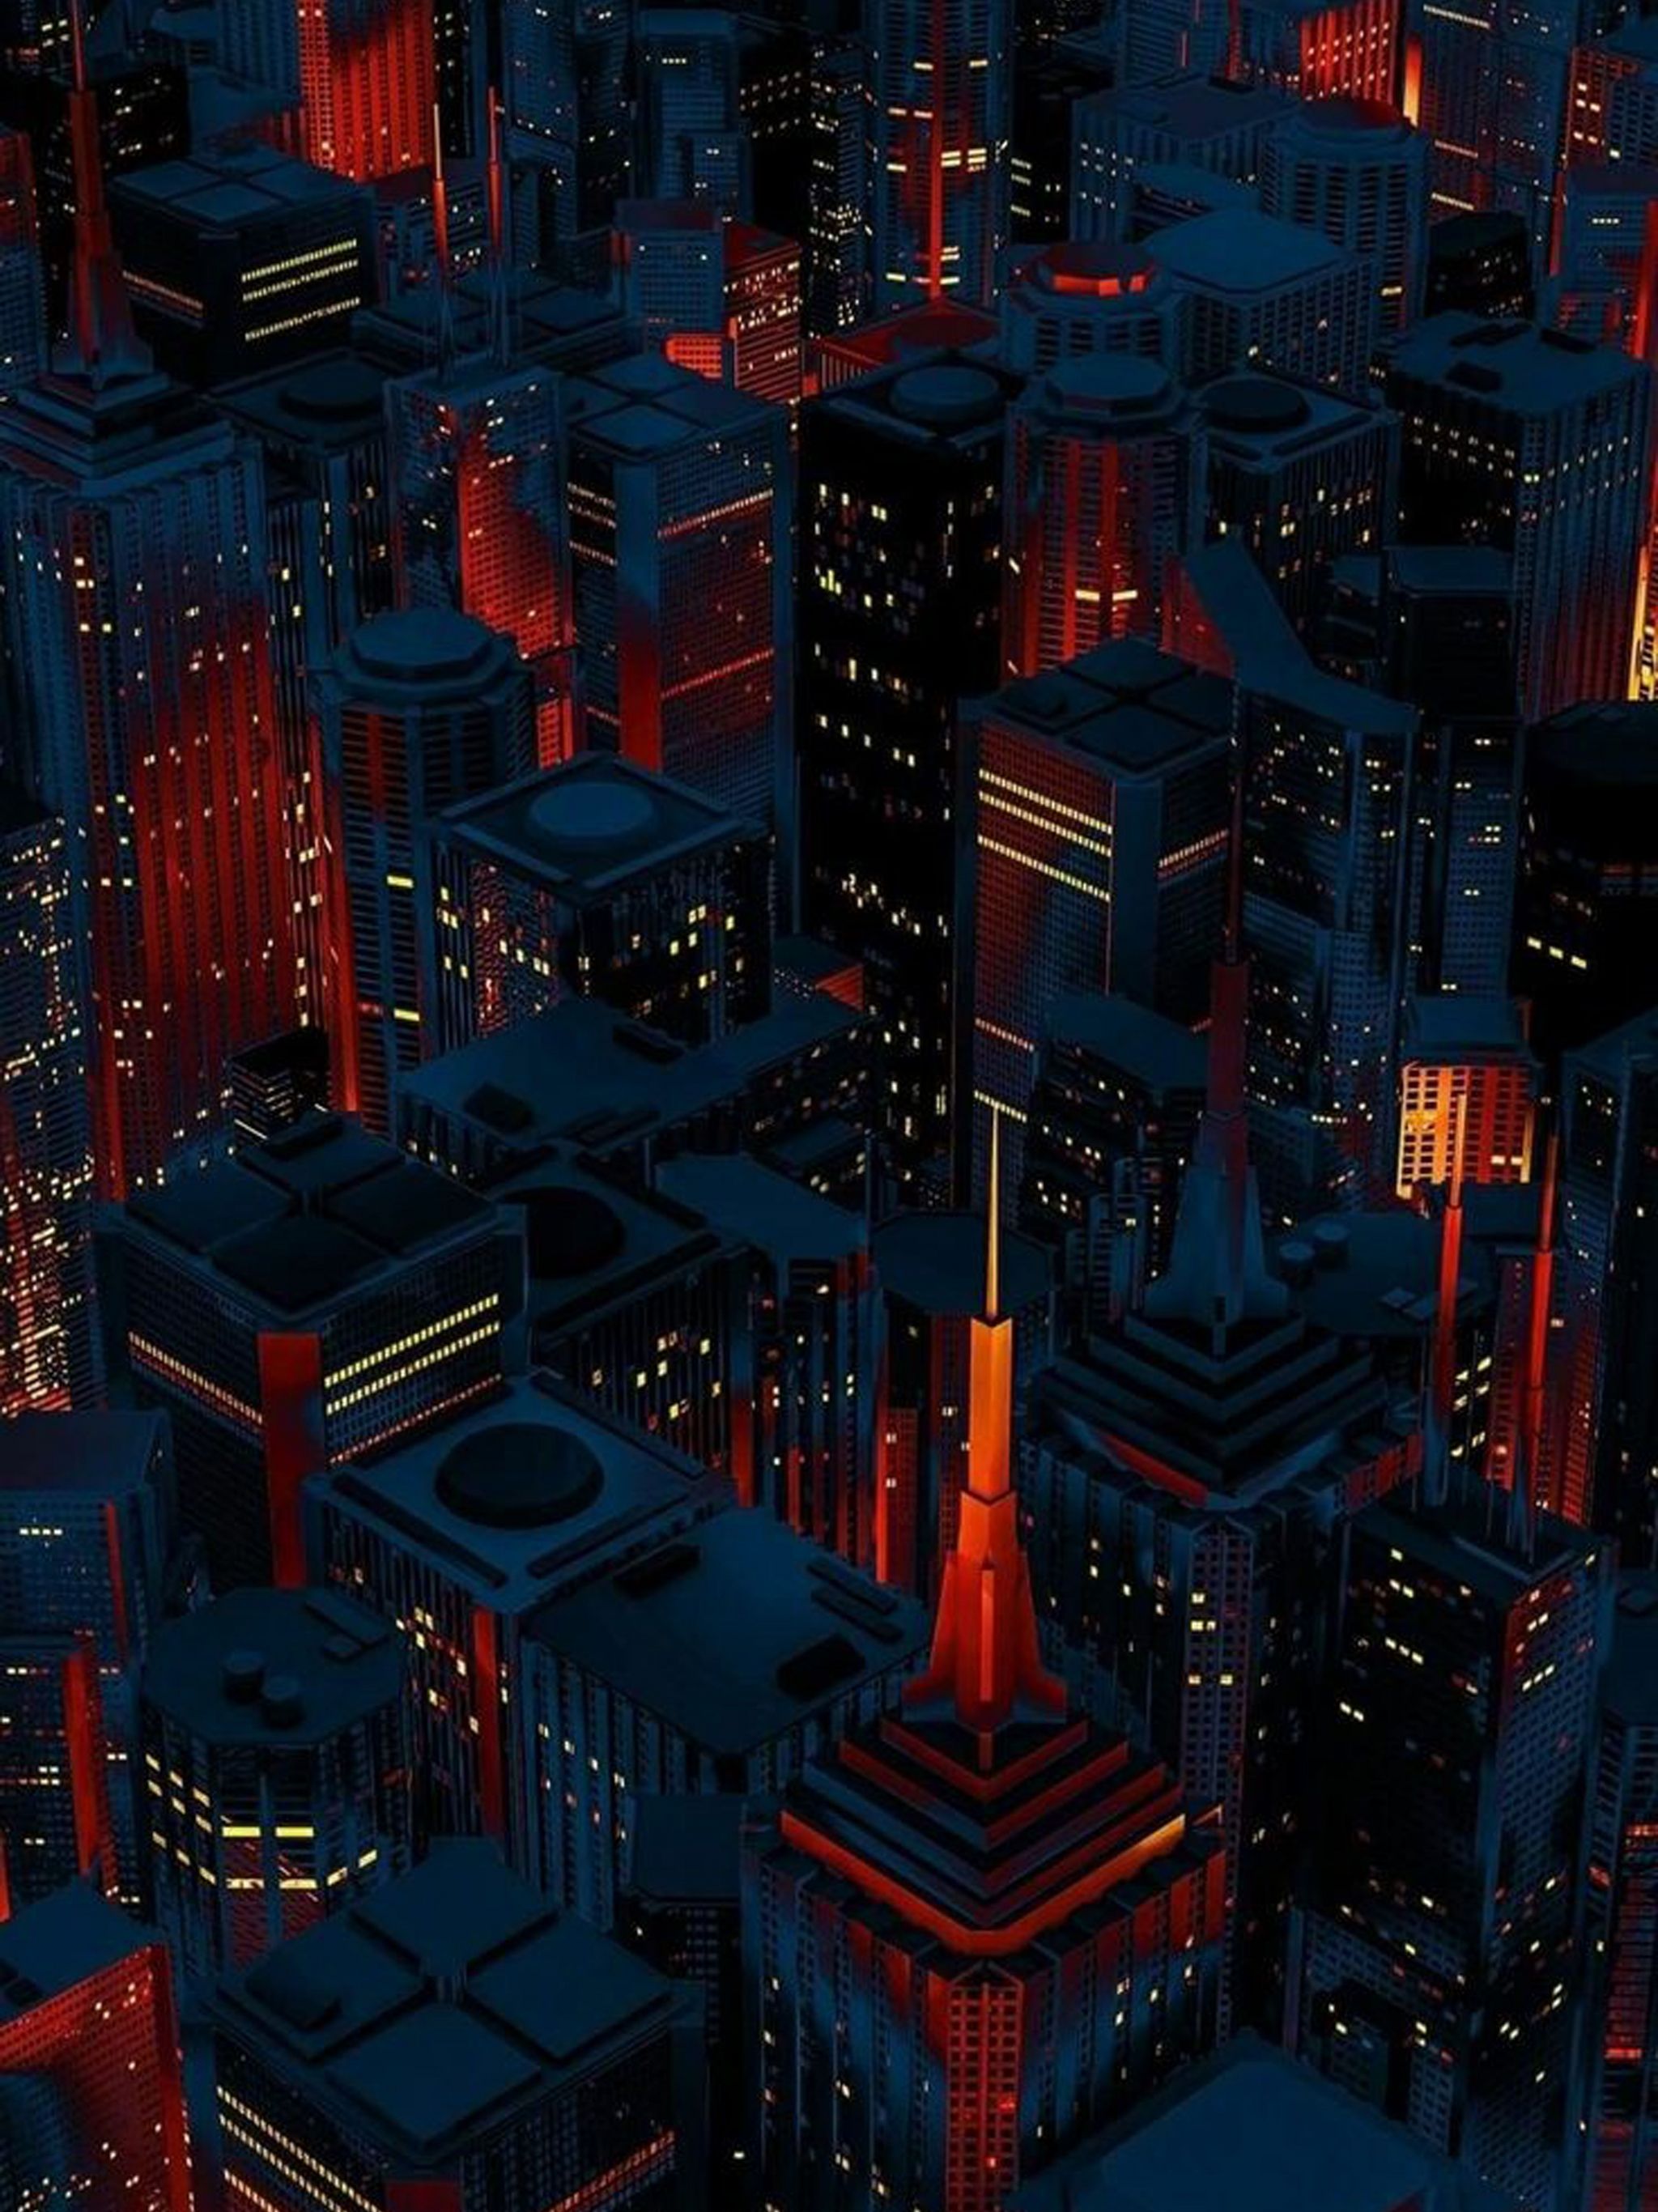 A cityscape of skyscrapers lit up at night - City